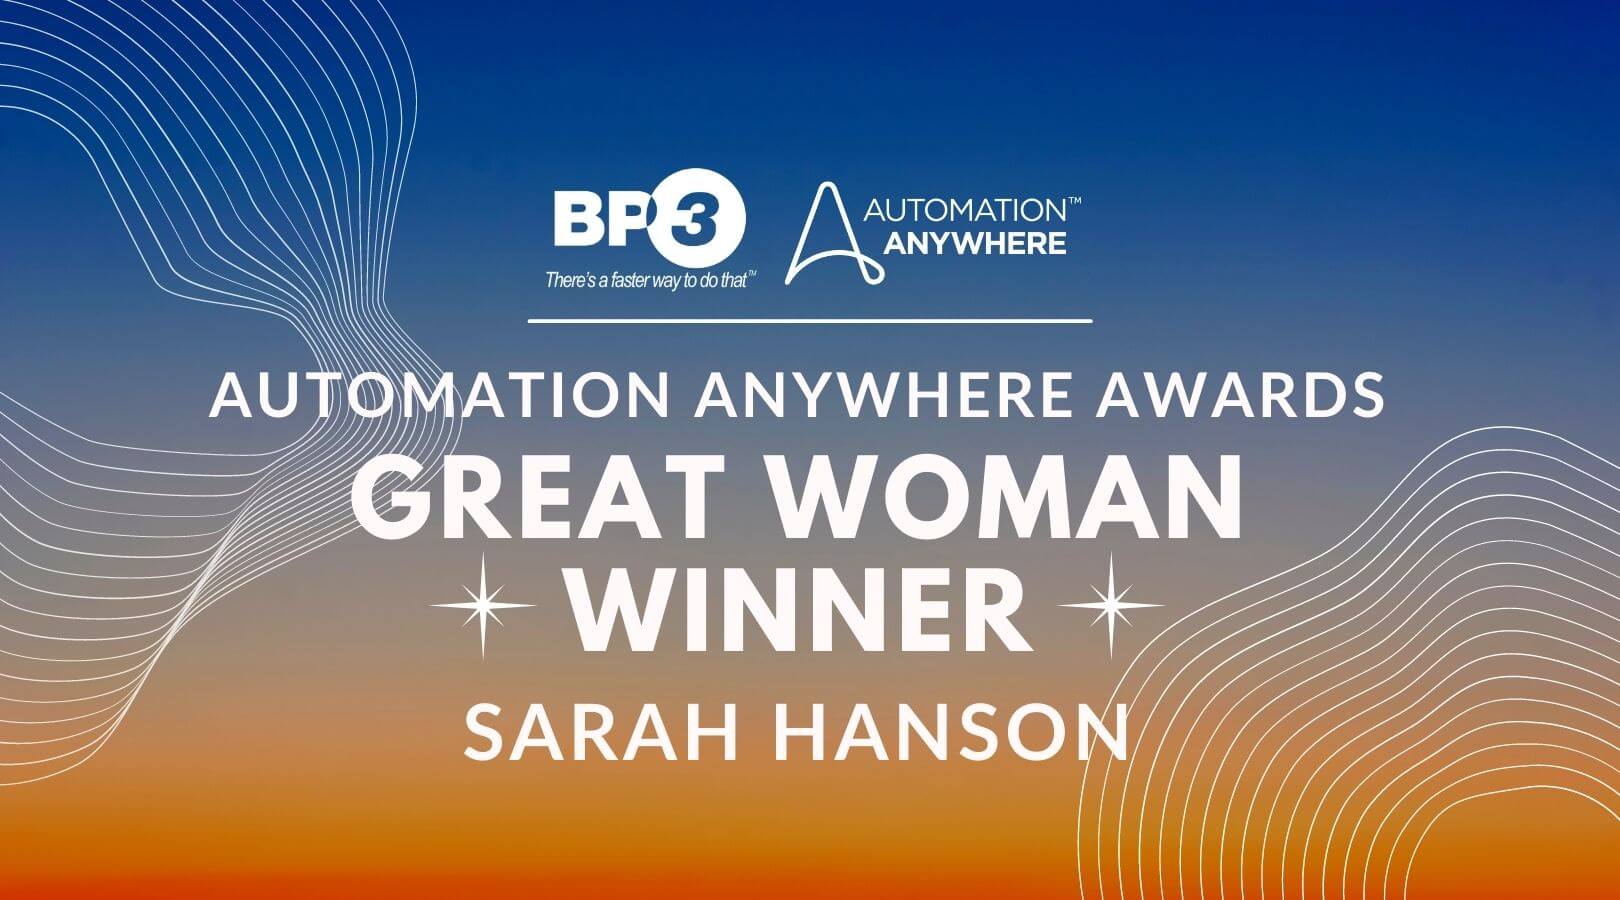 Sarah Hanson recognized as Automation Anywhere’s Great Women Americas Award Winner